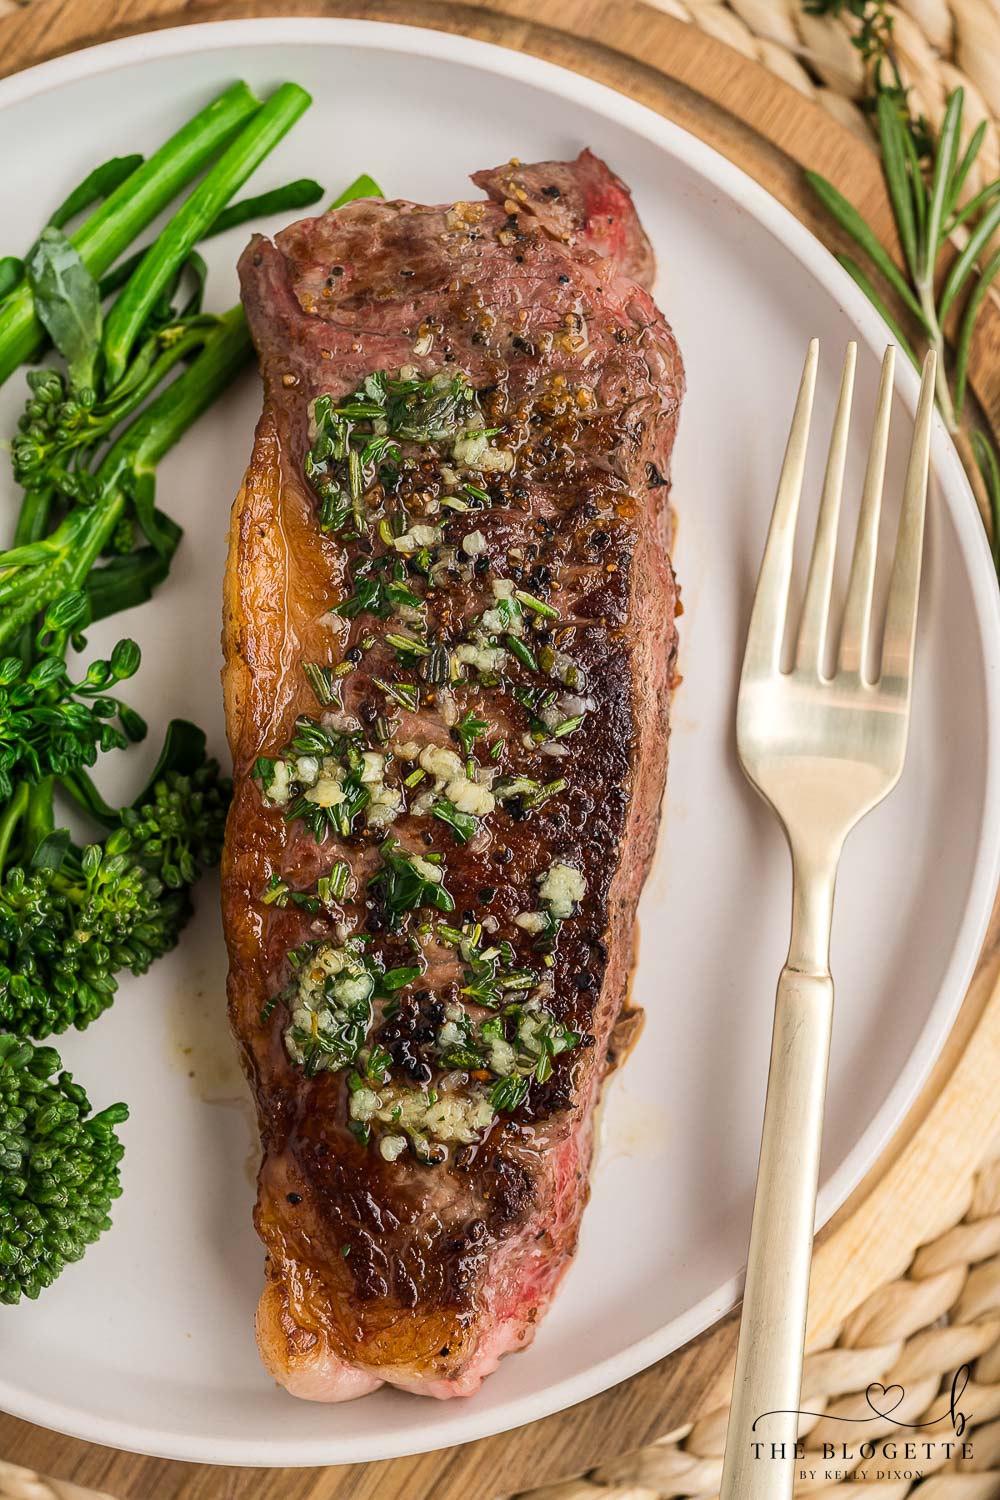 Experience steak perfection like never before with this Pan Seared Steak recipe. Seared crust and herb butter.